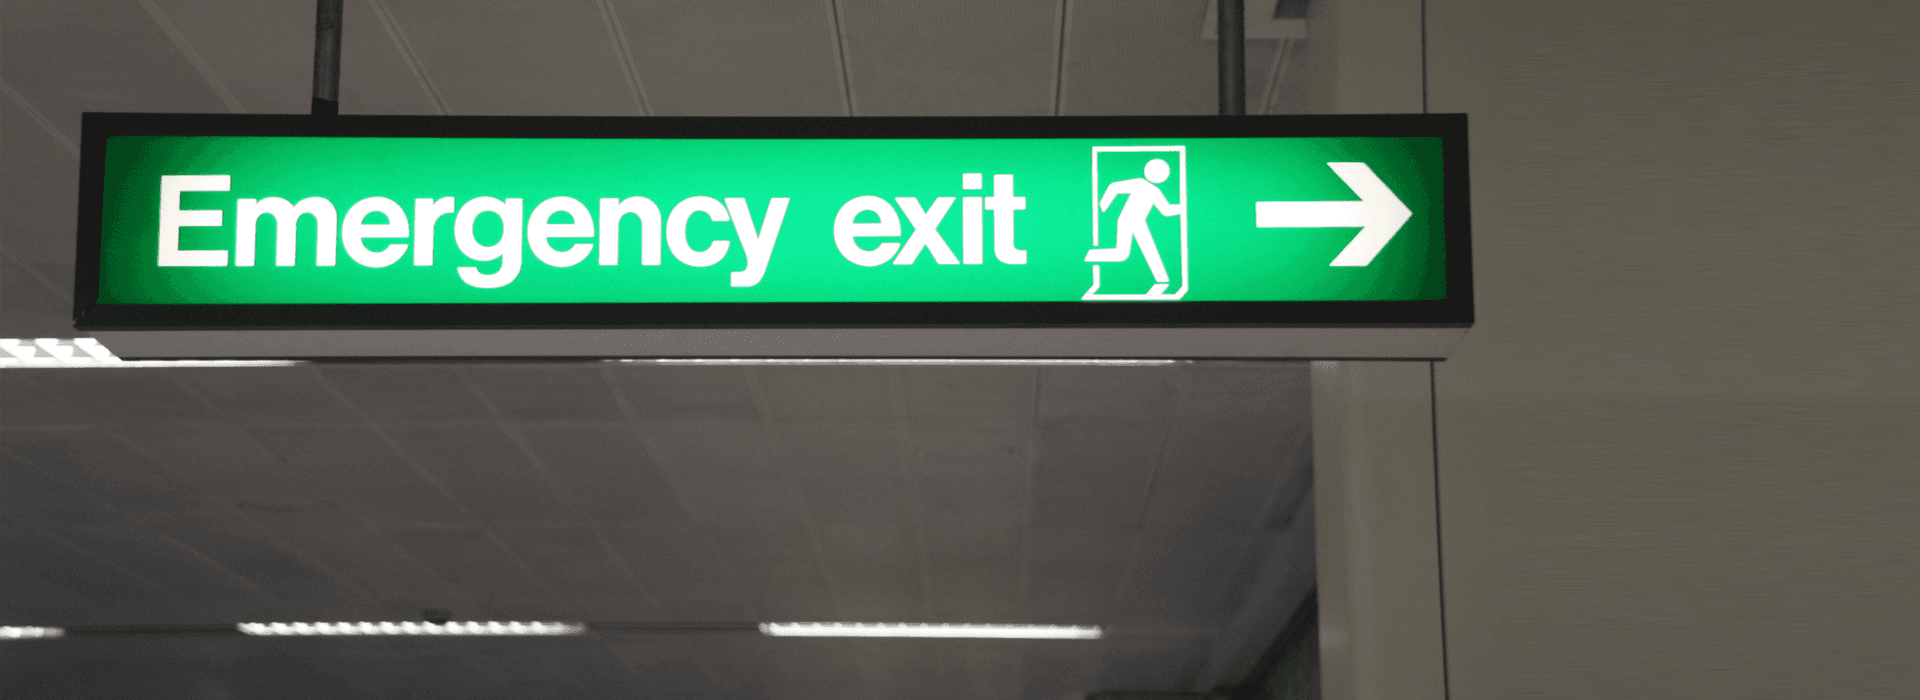 emergency exit sign board 